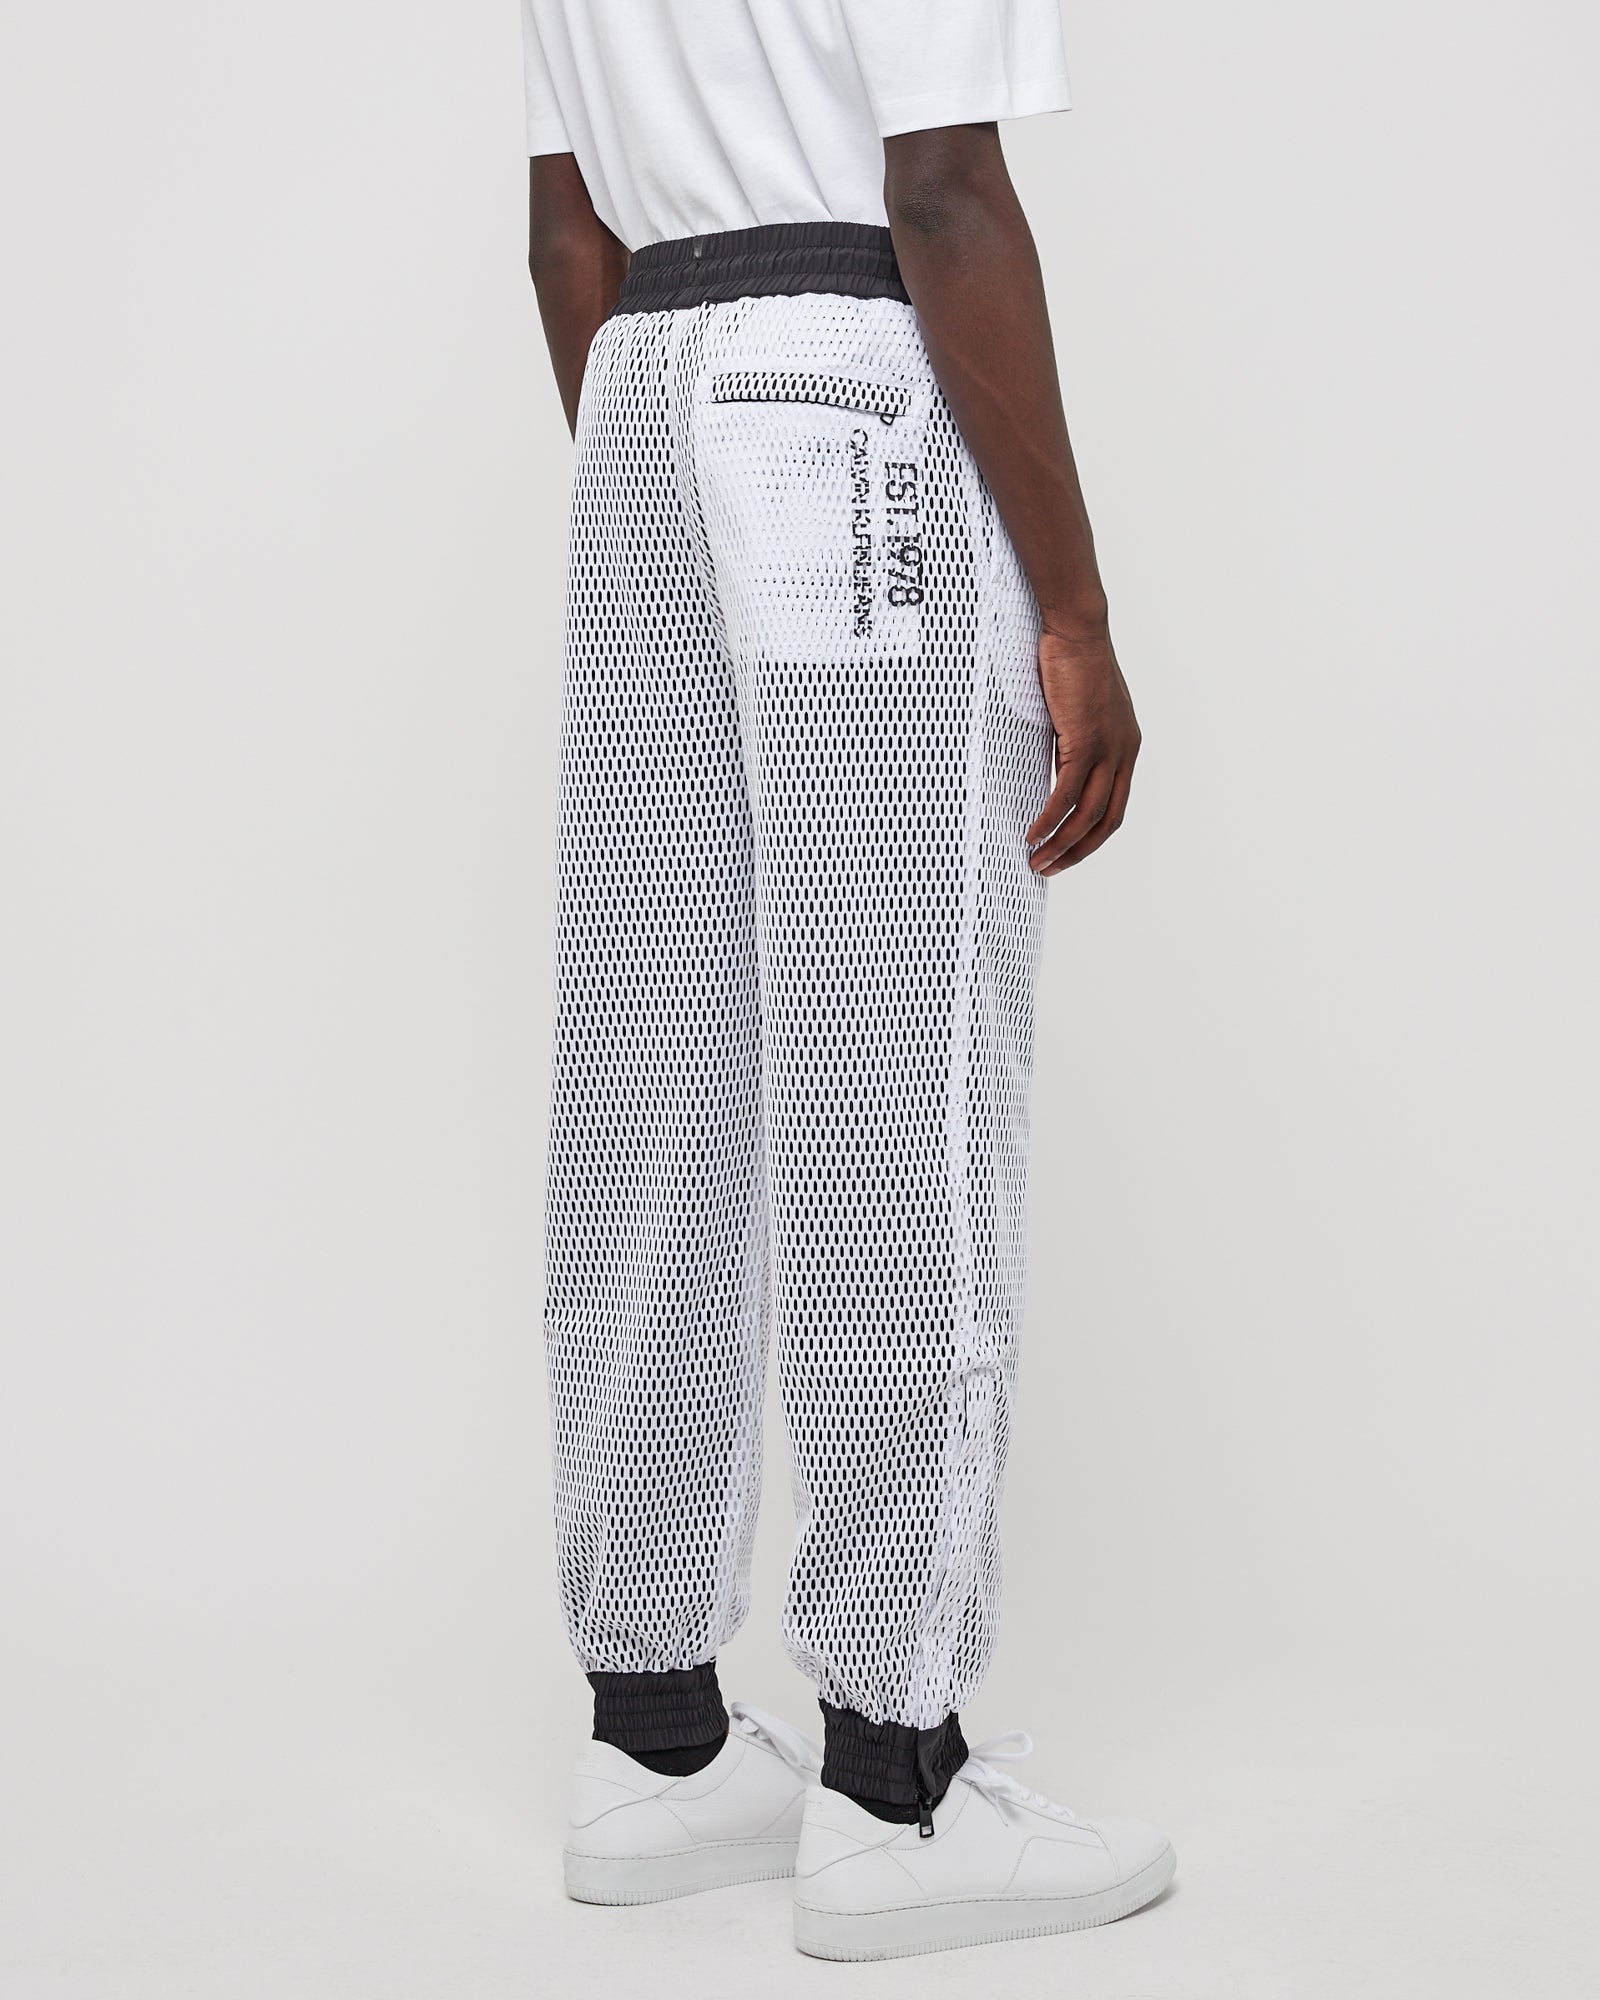 Inside Out Track Pants in Black